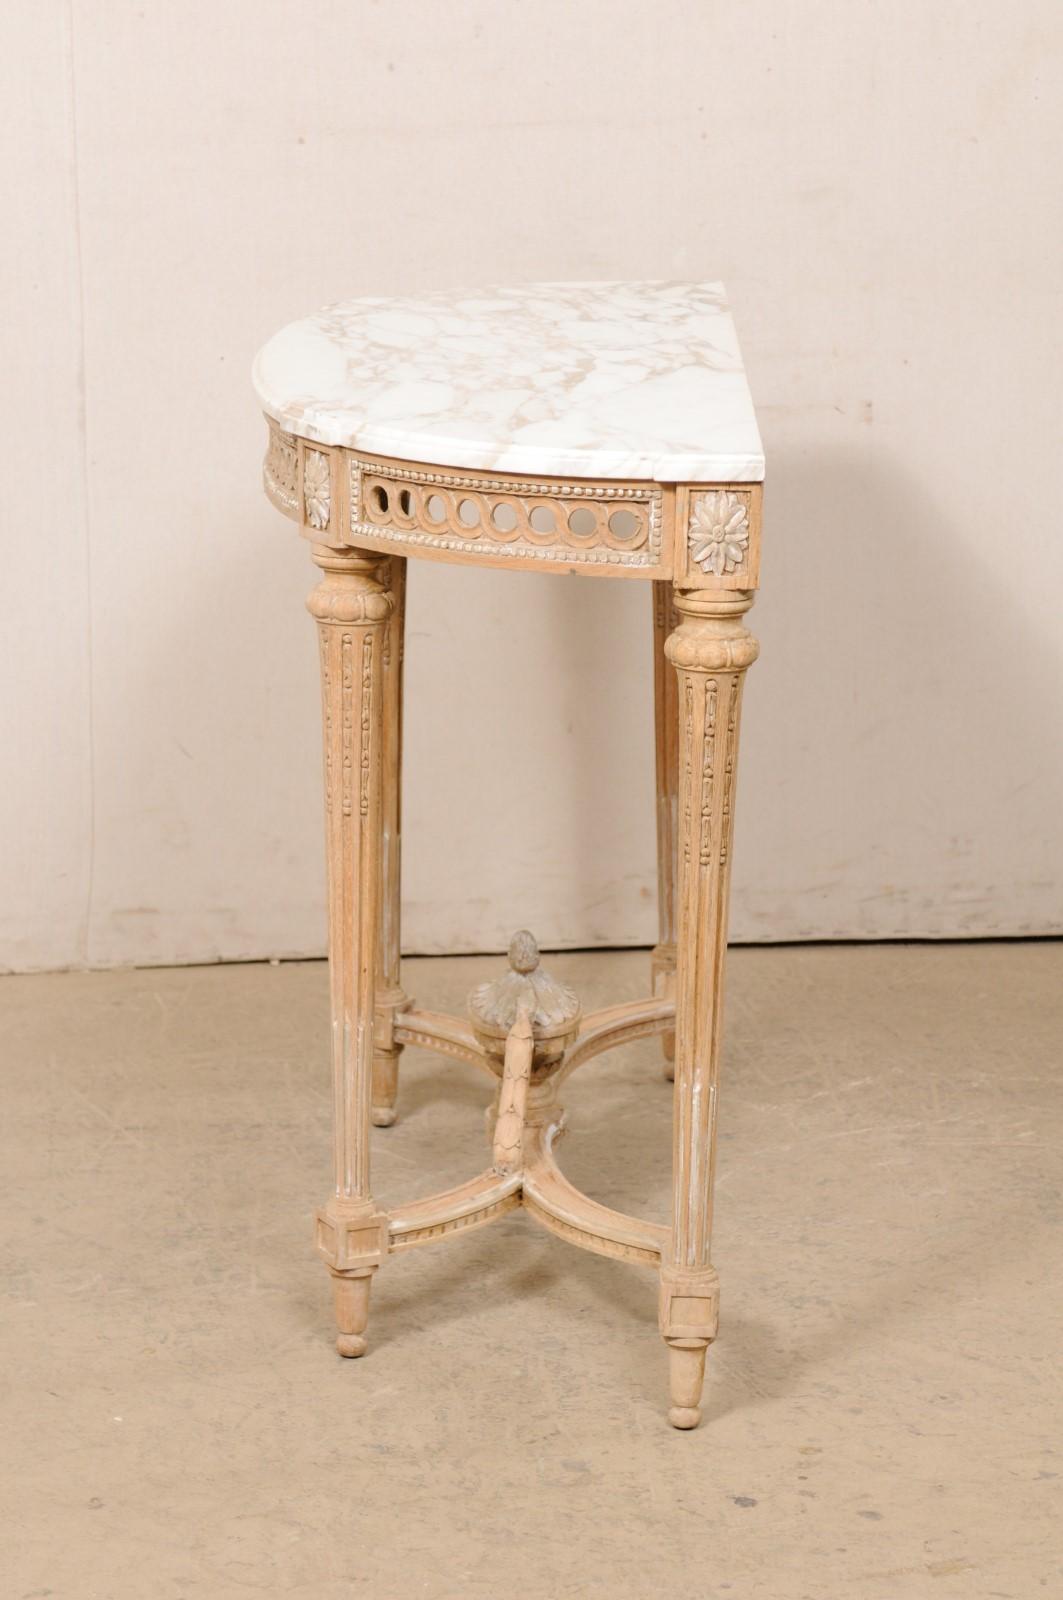 French Neoclassic Style Marble-Top Console Table W/Nice Urn Finial at Underside For Sale 5